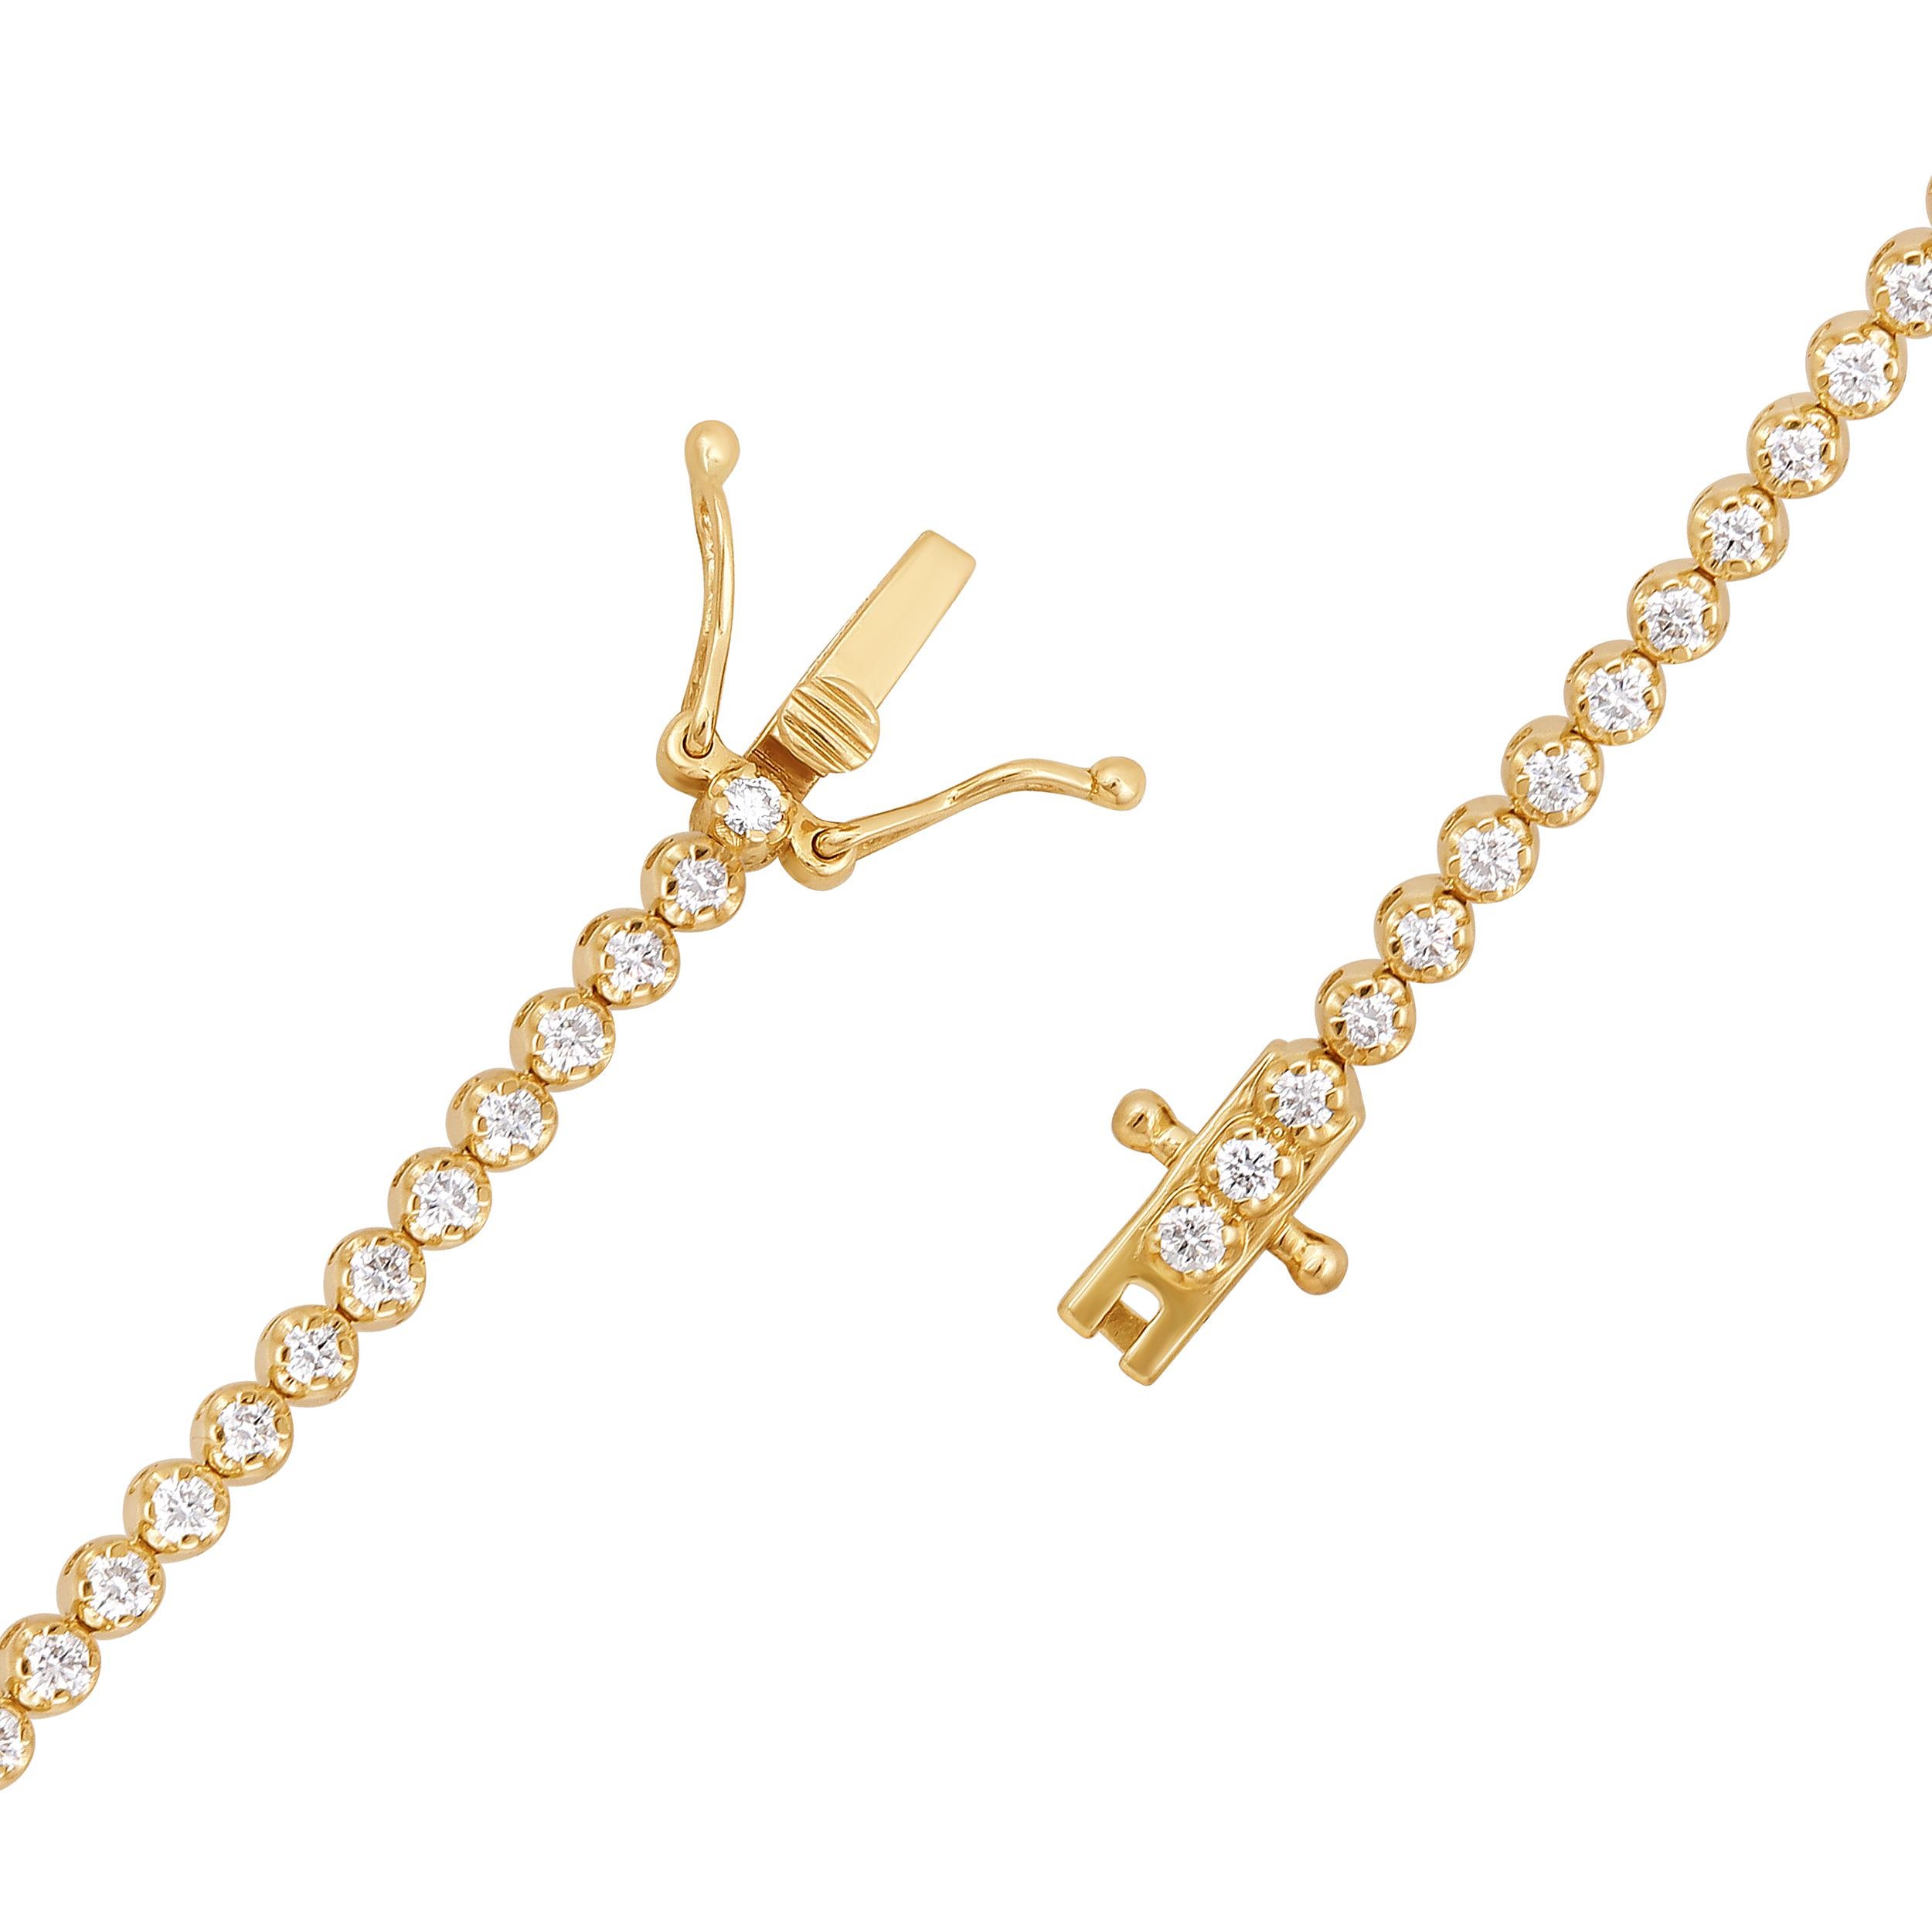 Crafted in 4.82 grams of 14K Yellow Gold, the bracelet contains 90 stones of Round Natural Diamonds with a total of 0.95 carat in G-H color and VS-SI clarity. The bracelet length is 7 inches.

CONTEMPORARY AND TIMELESS ESSENCE: Crafted in